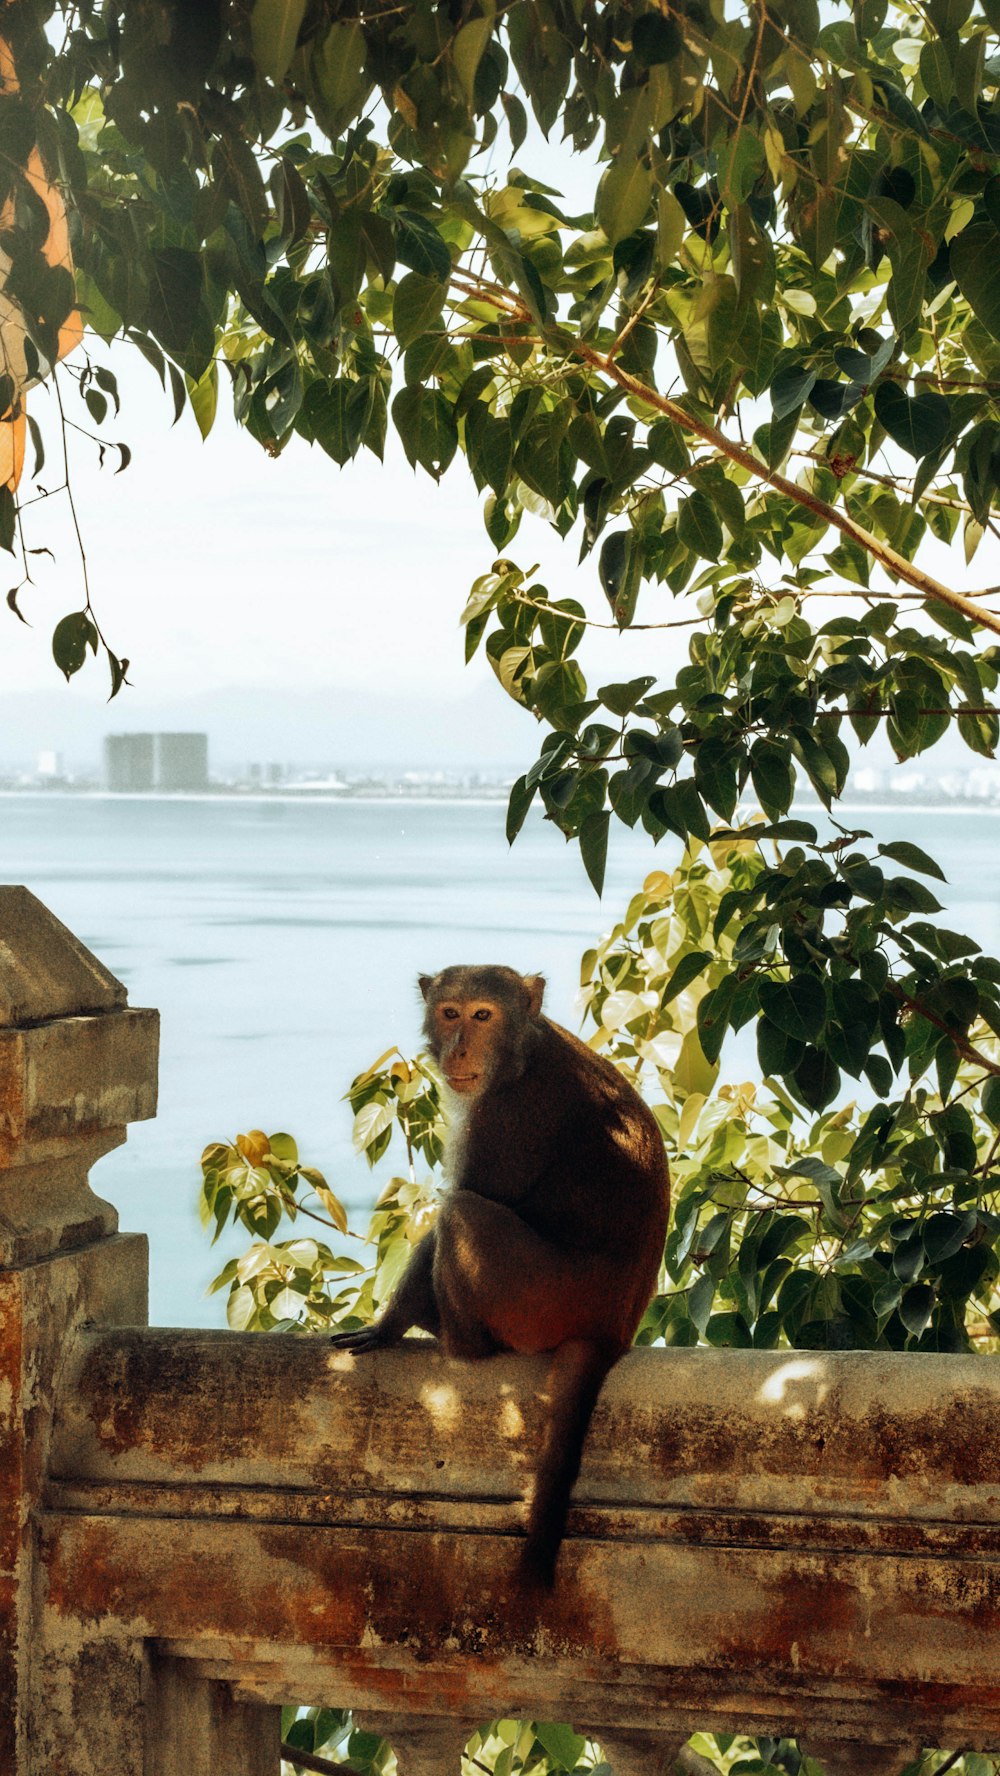 a monkey sitting on a fence looking out over the water